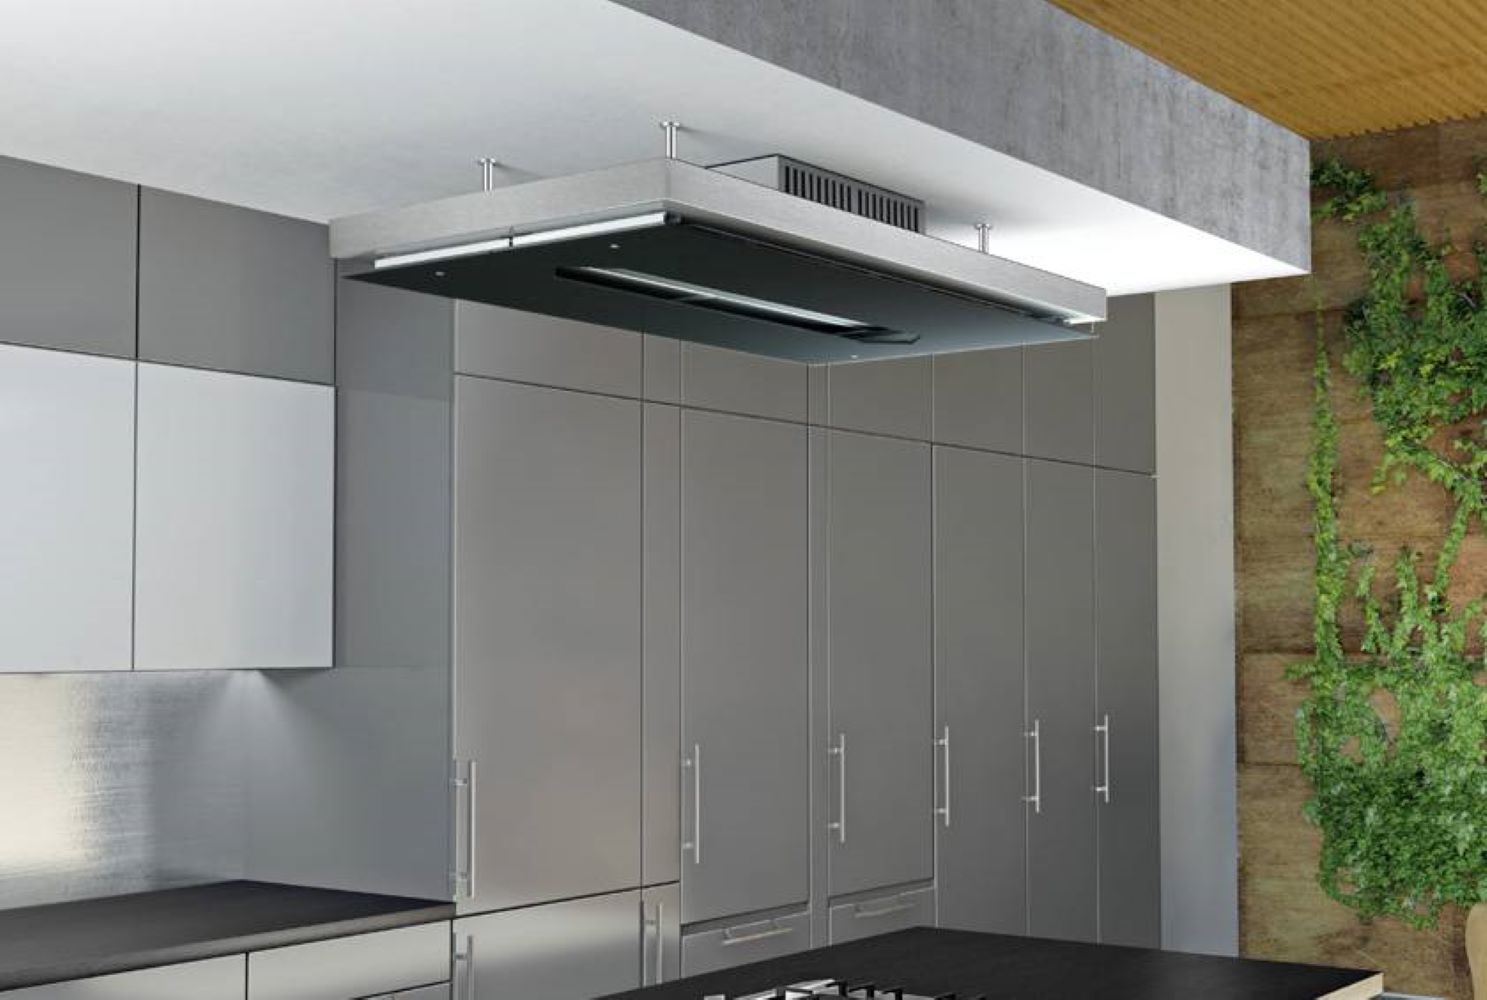 Airforce F139 F 120cm Ceiling Cooker Hood with Remote Control - Black glass - Devine Distribution Ltd